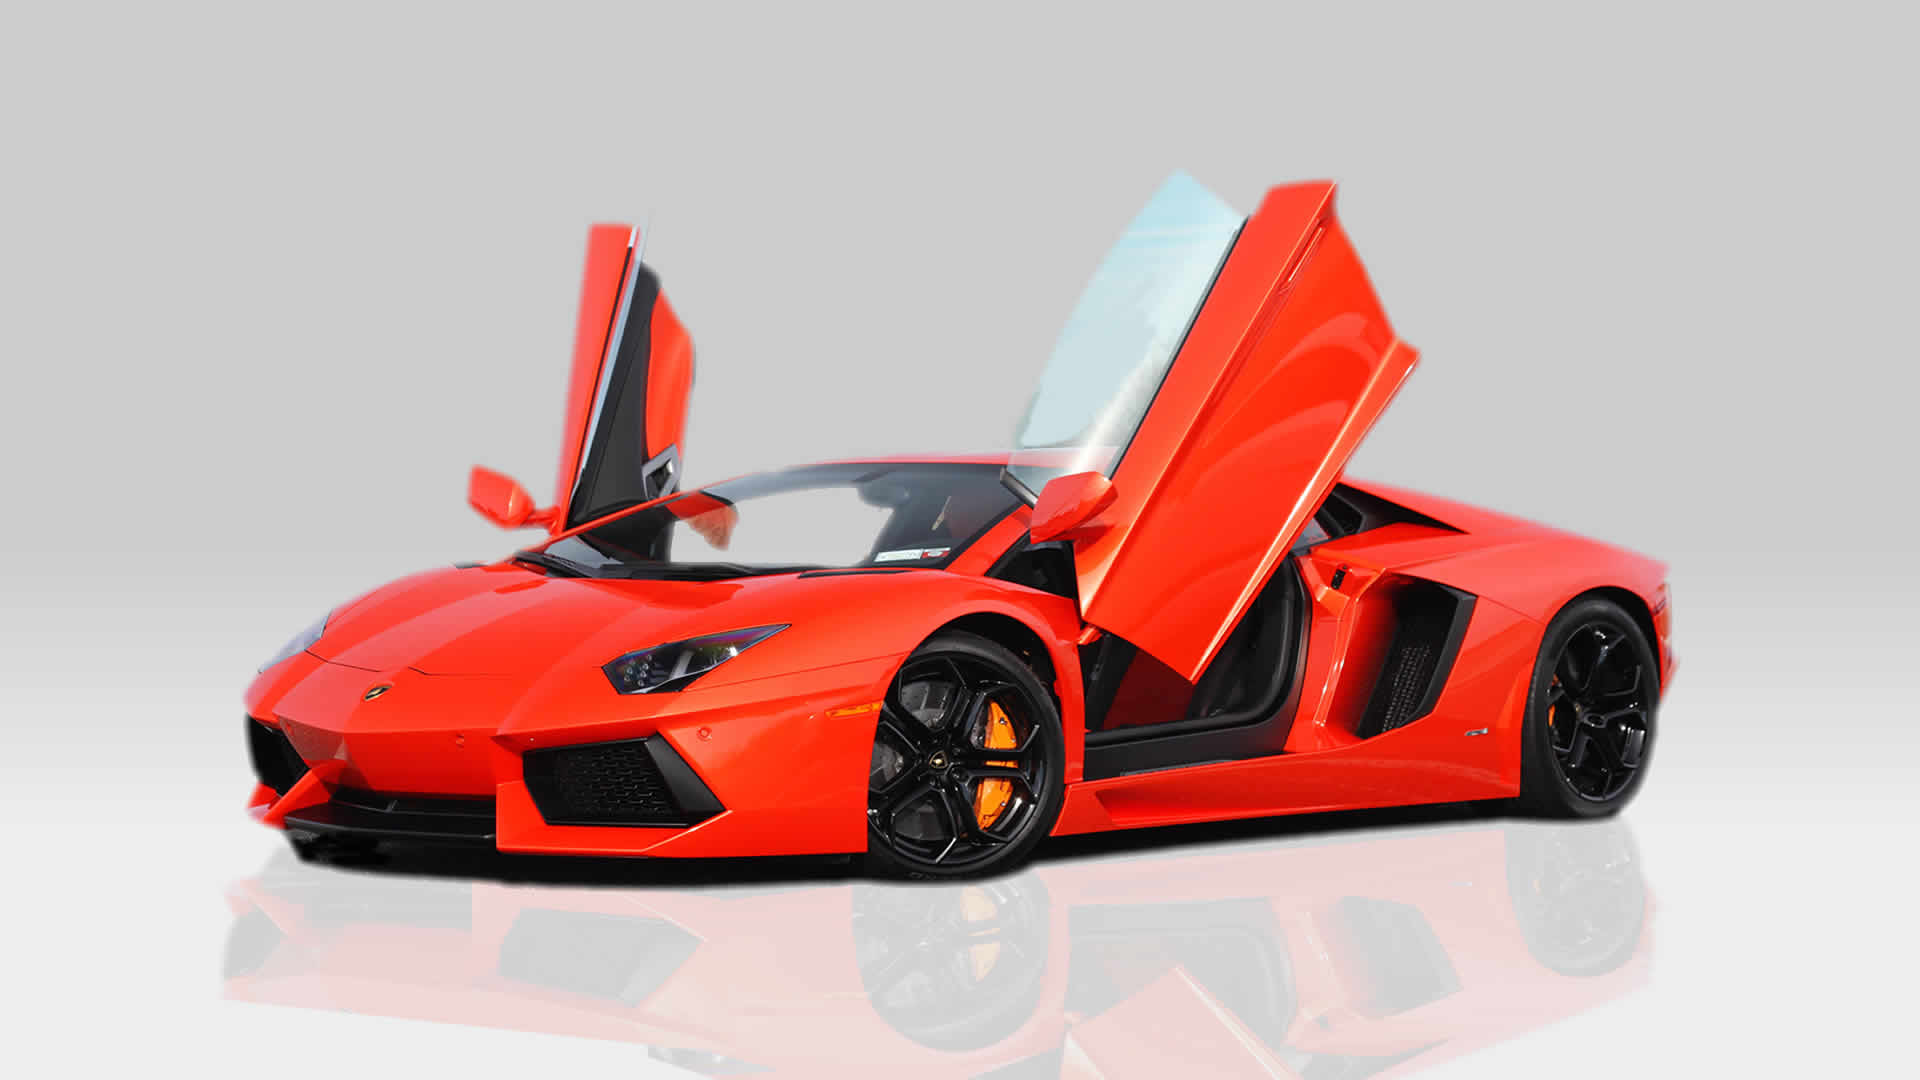 Extreme Kit Cars – High Quality Replica Sports Cars. Own A Super Car Now